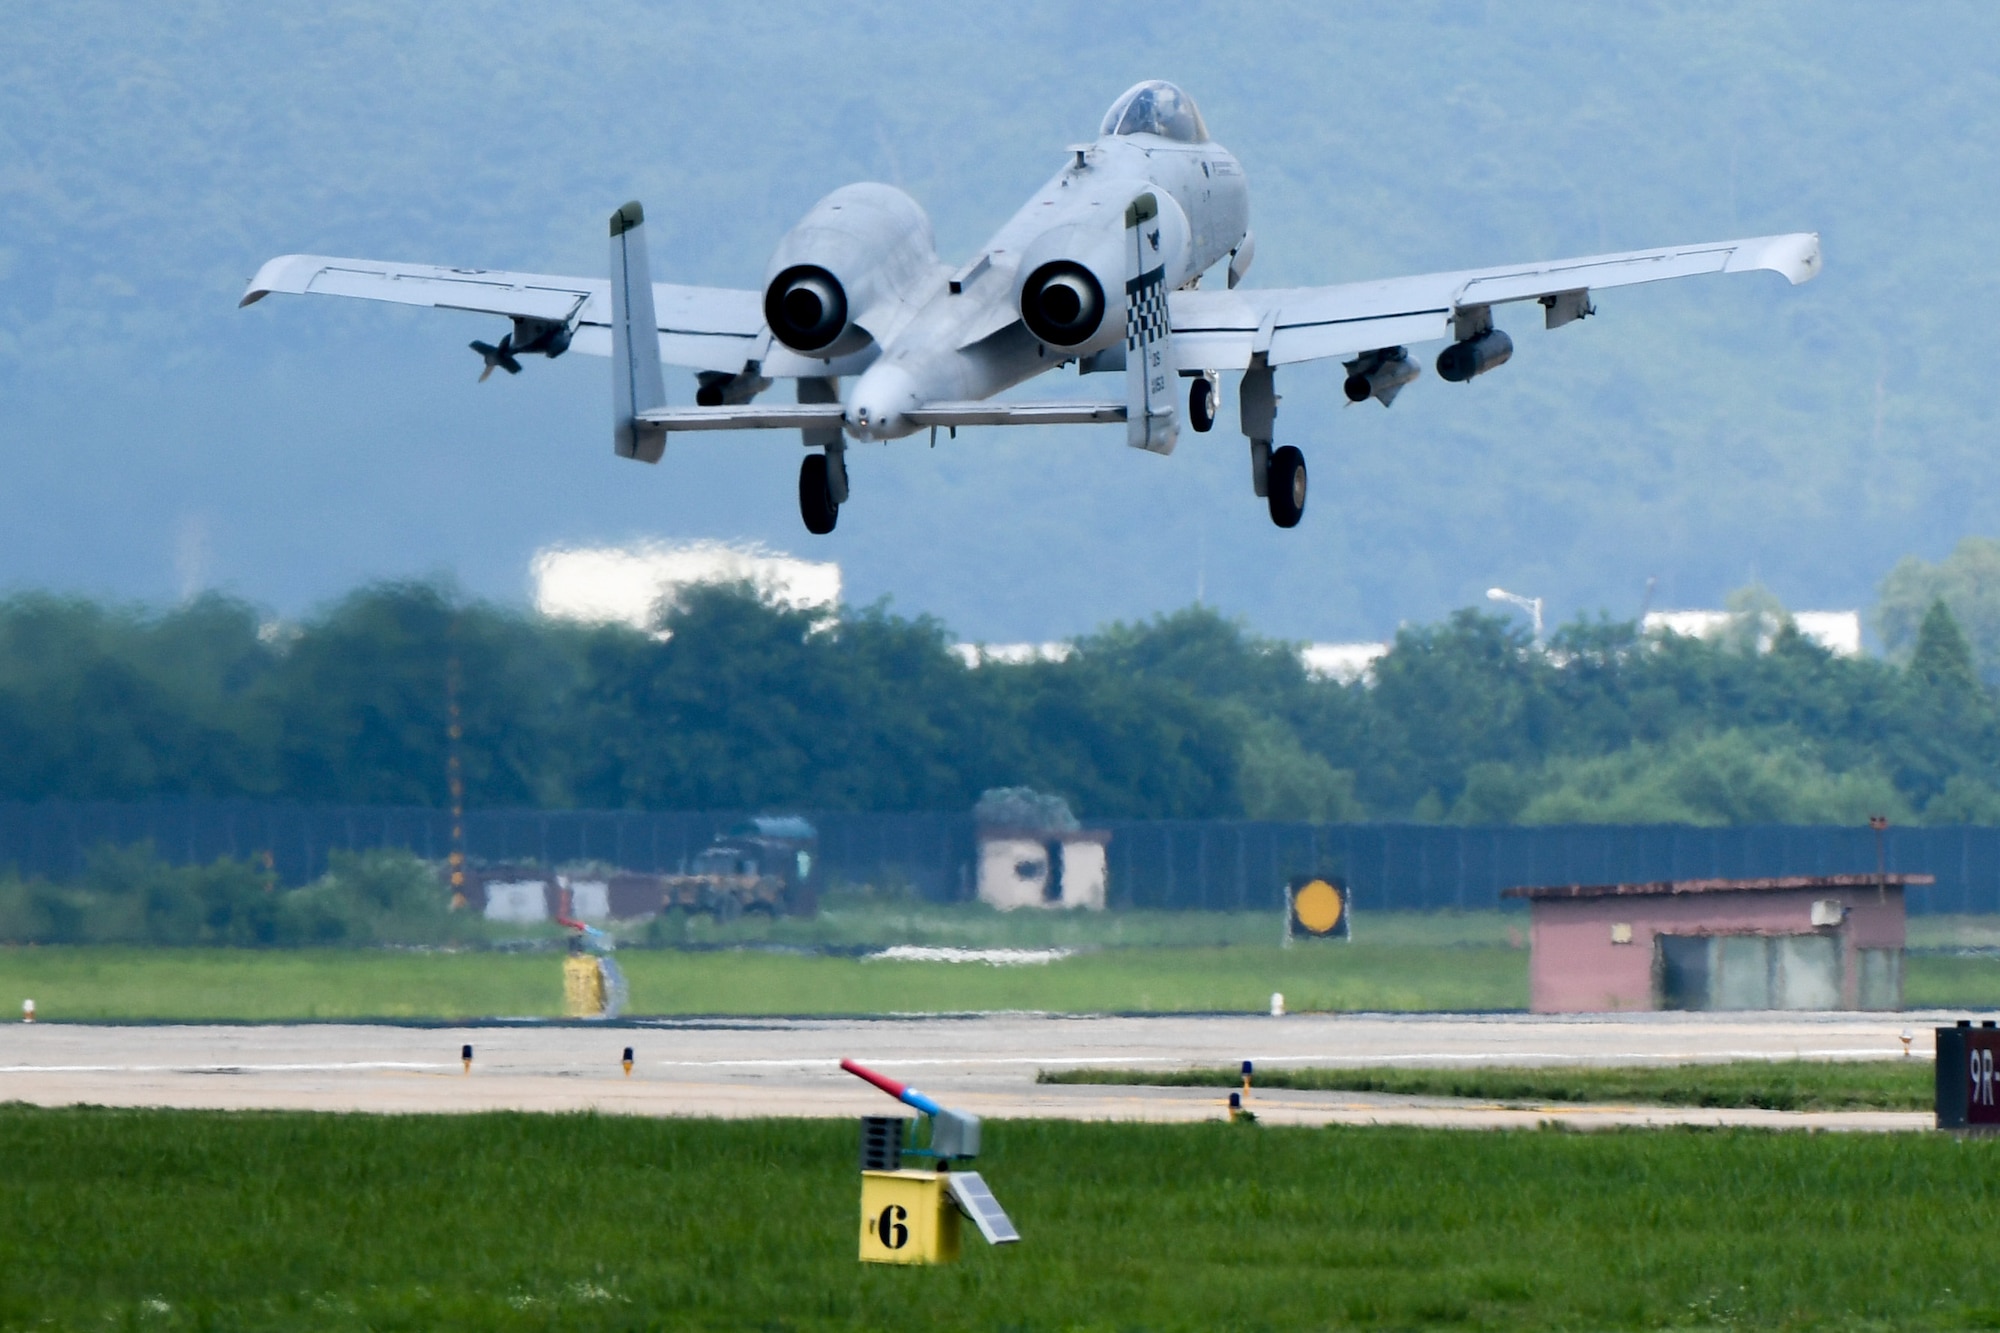 An A-10 Thunderbolt II flies over a bird and wildlife aircraft strike hazard cannon placed on the flightline at Osan Air Base, Republic of Korea, July 19, 2016. The cannons, operated by the 51st Fighter Wing safety office, can make a variety of noises from large booms to wild animal distress noises to help detour Korea’s wildlife from the flightline. This ensures the safety of both the wildlife and pilots operating aircraft. (U.S. Air Force photo by Staff Sgt. Jonathan Steffen/Released)